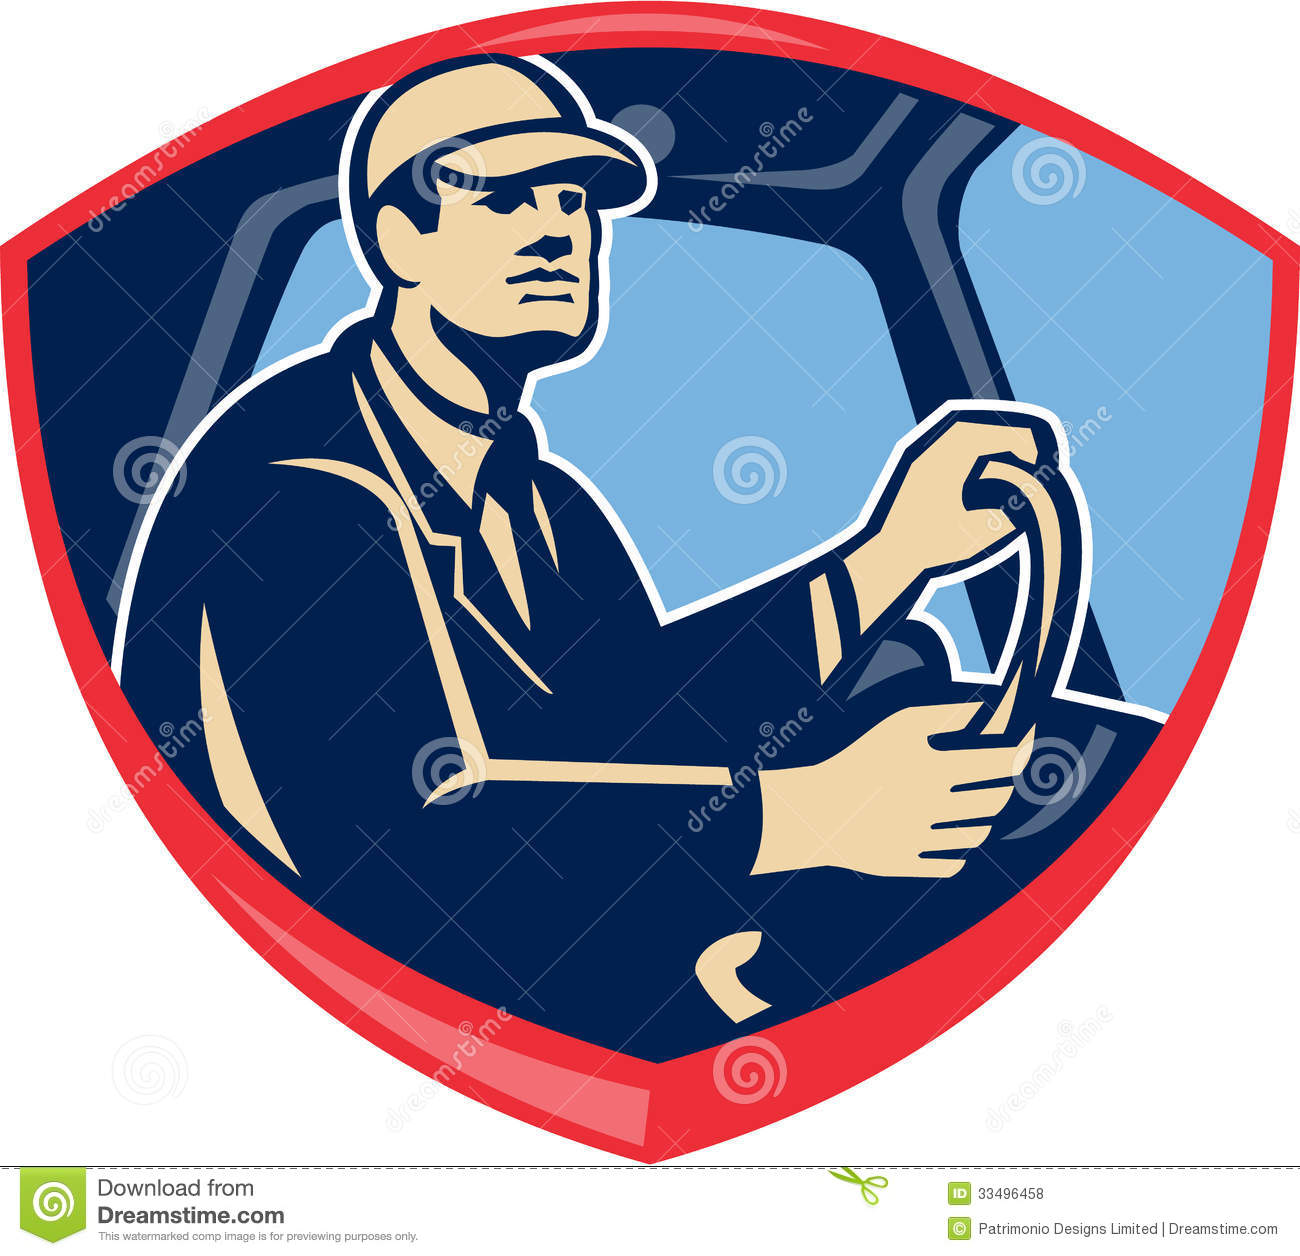 Illustration Of A Bus Or Truck Driver Driver Inside Vehicle Viewed